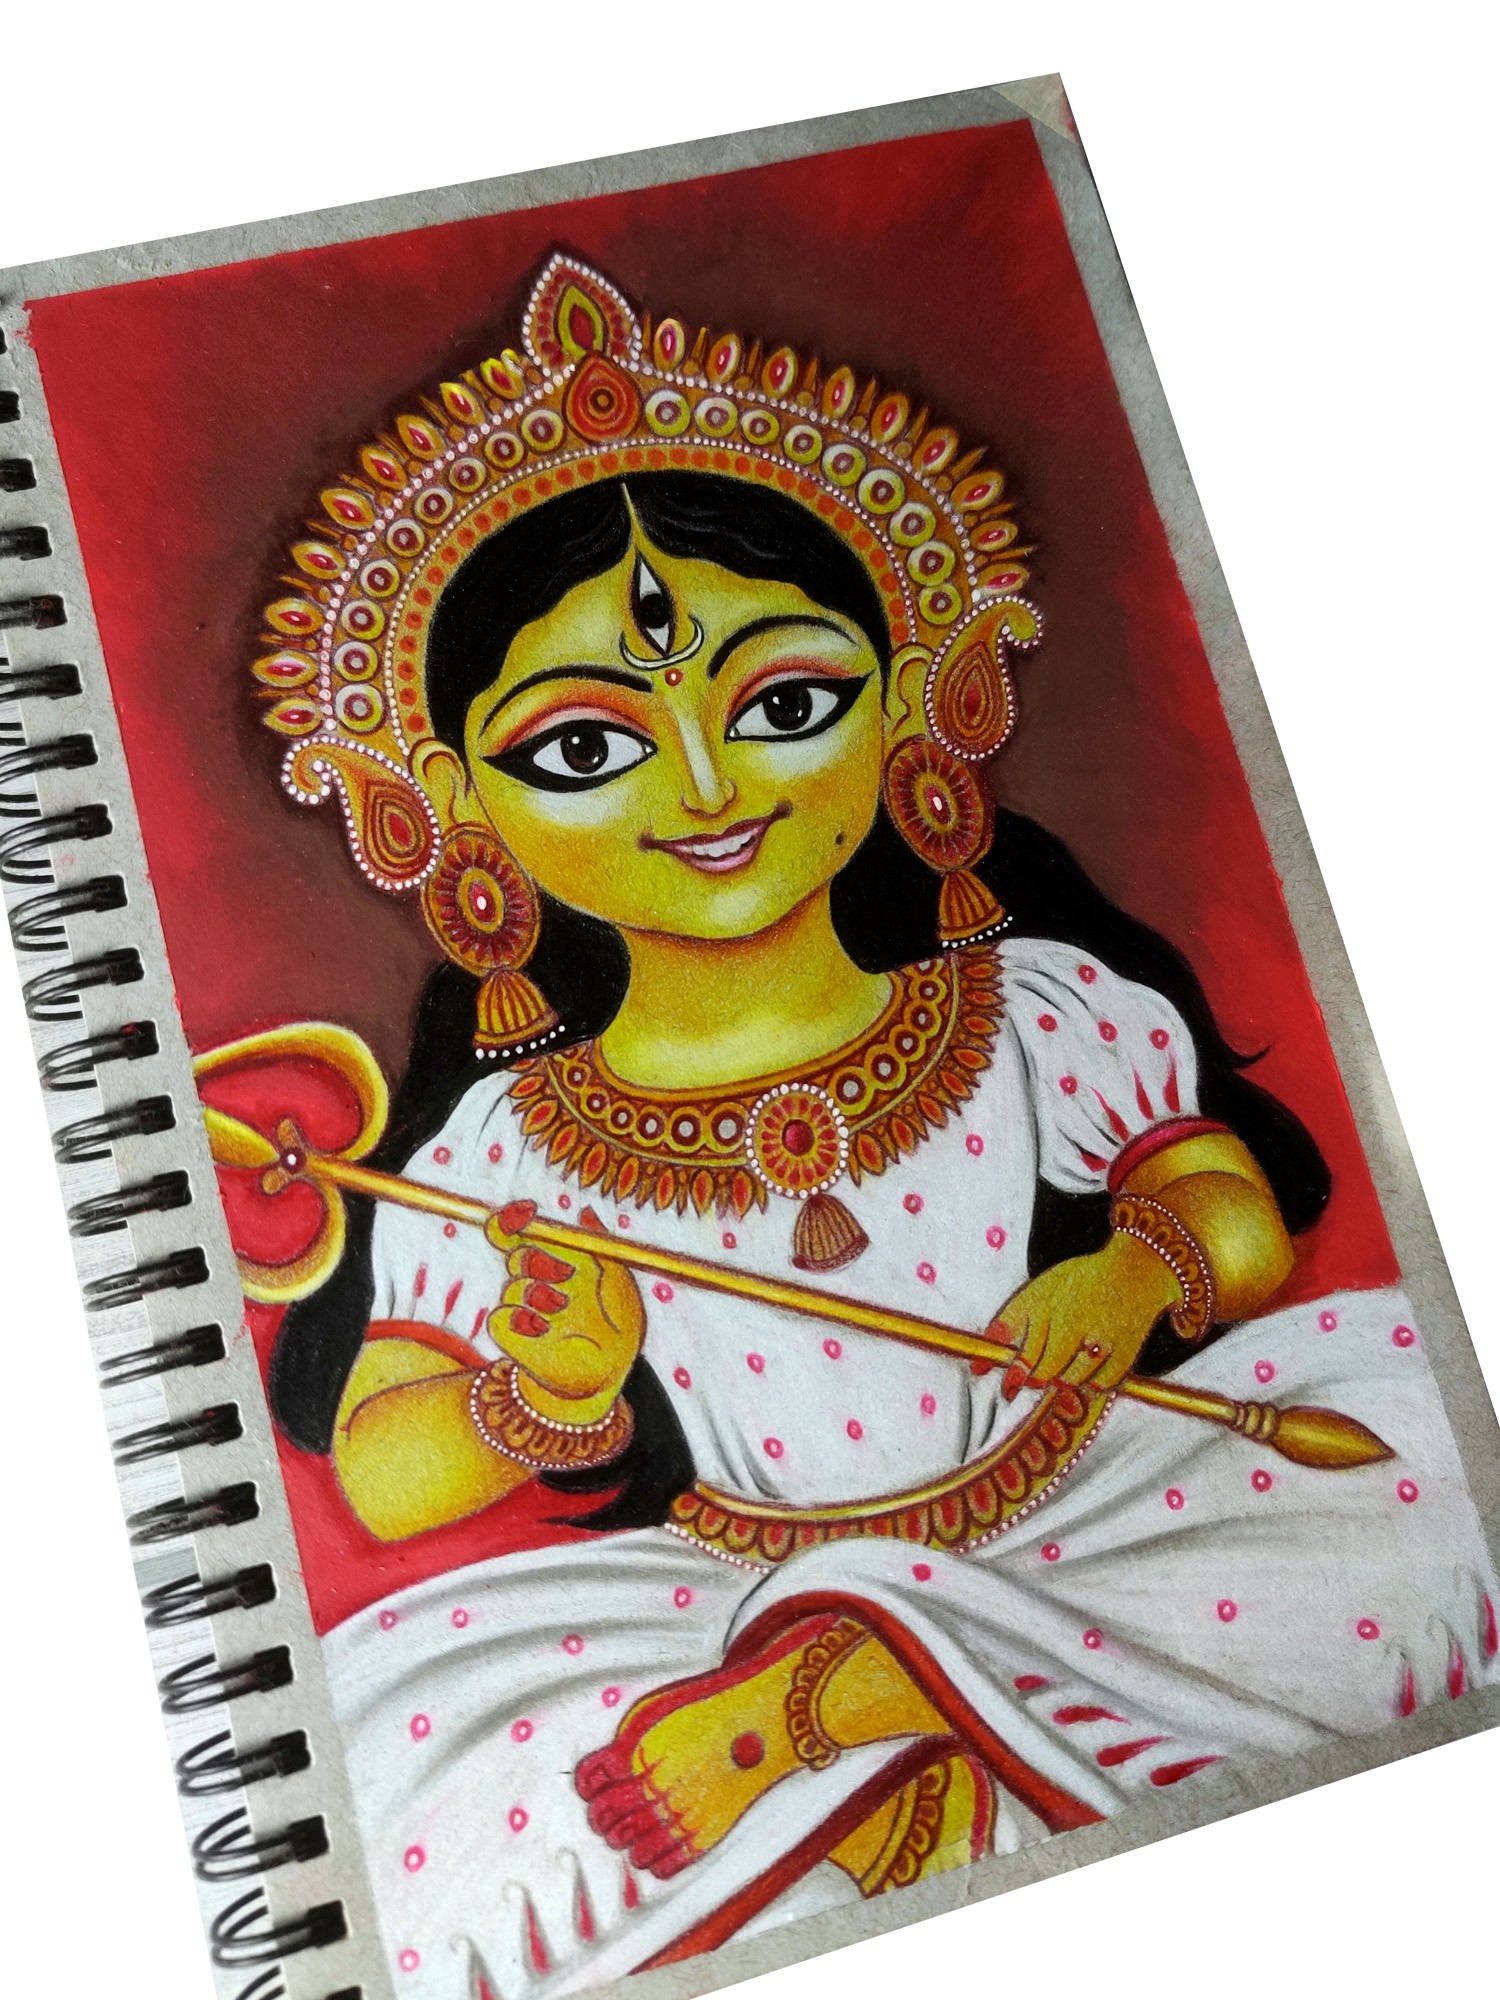 Durga Black: Over 687 Royalty-Free Licensable Stock Illustrations & Drawings  | Shutterstock